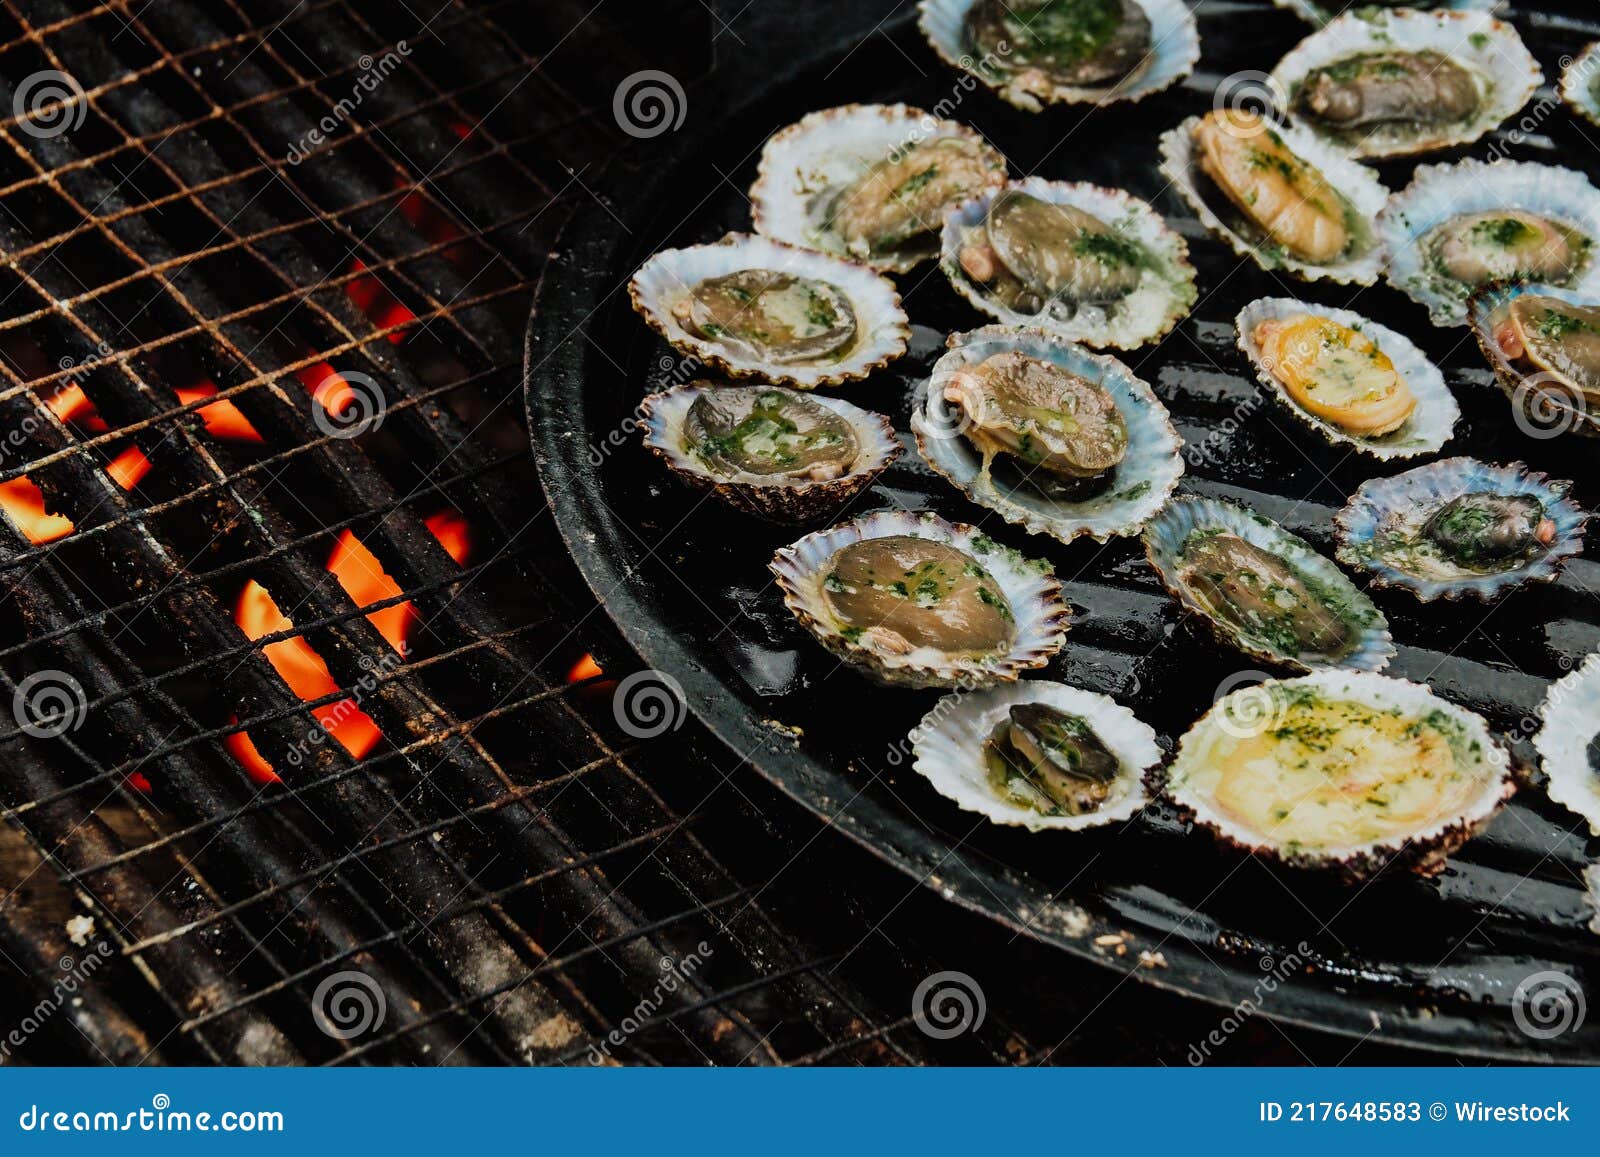 tray with lapas on a grill